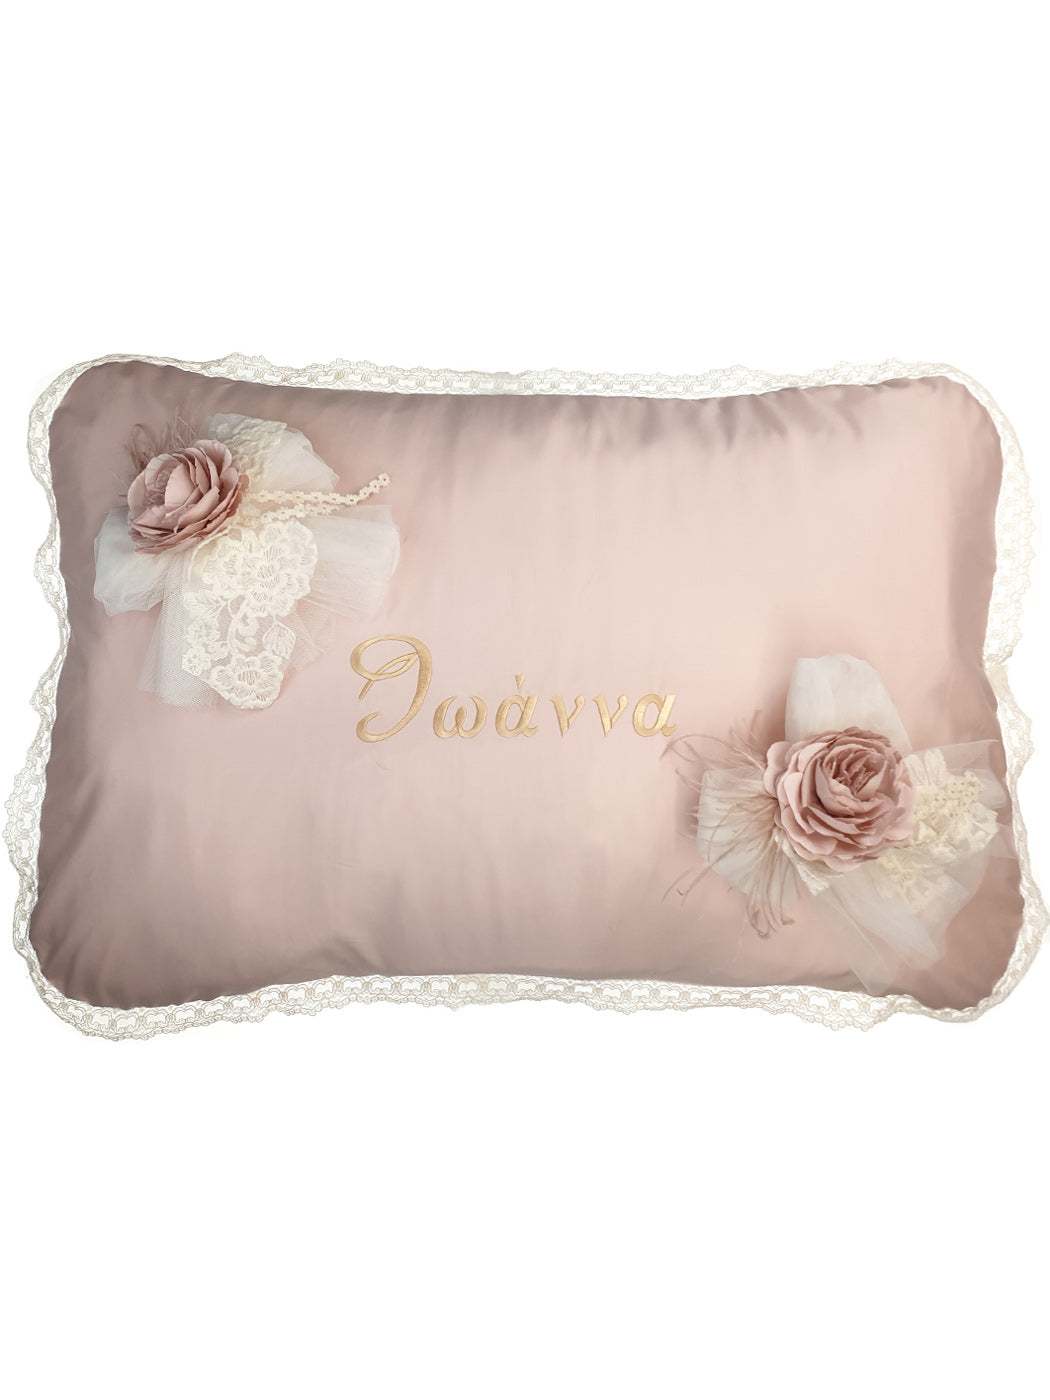 Baptism embroidered baby changing pillow